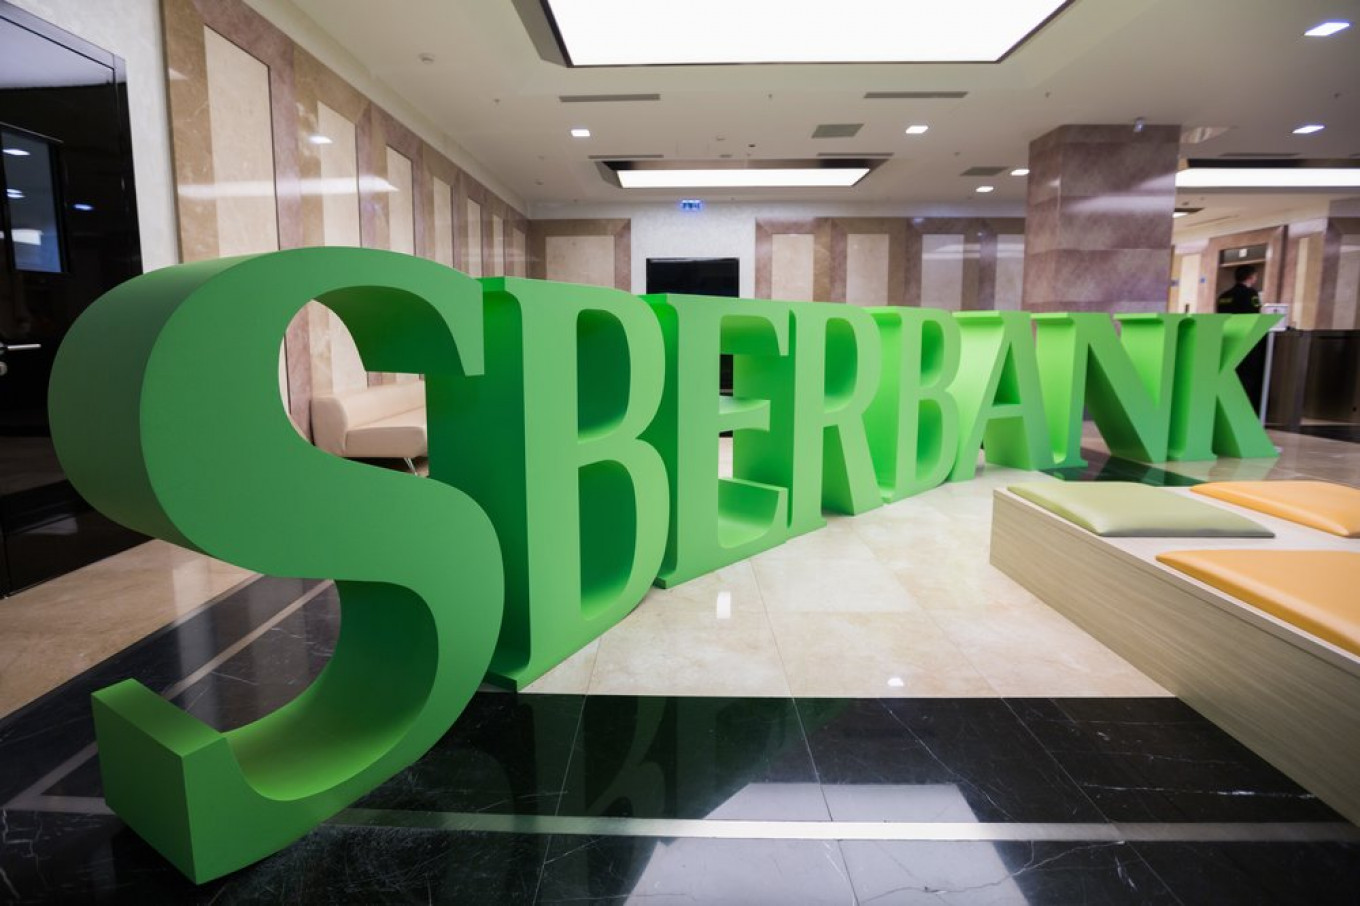 Sberbank Finalizes Mail.Ru Partnership - The Moscow Times